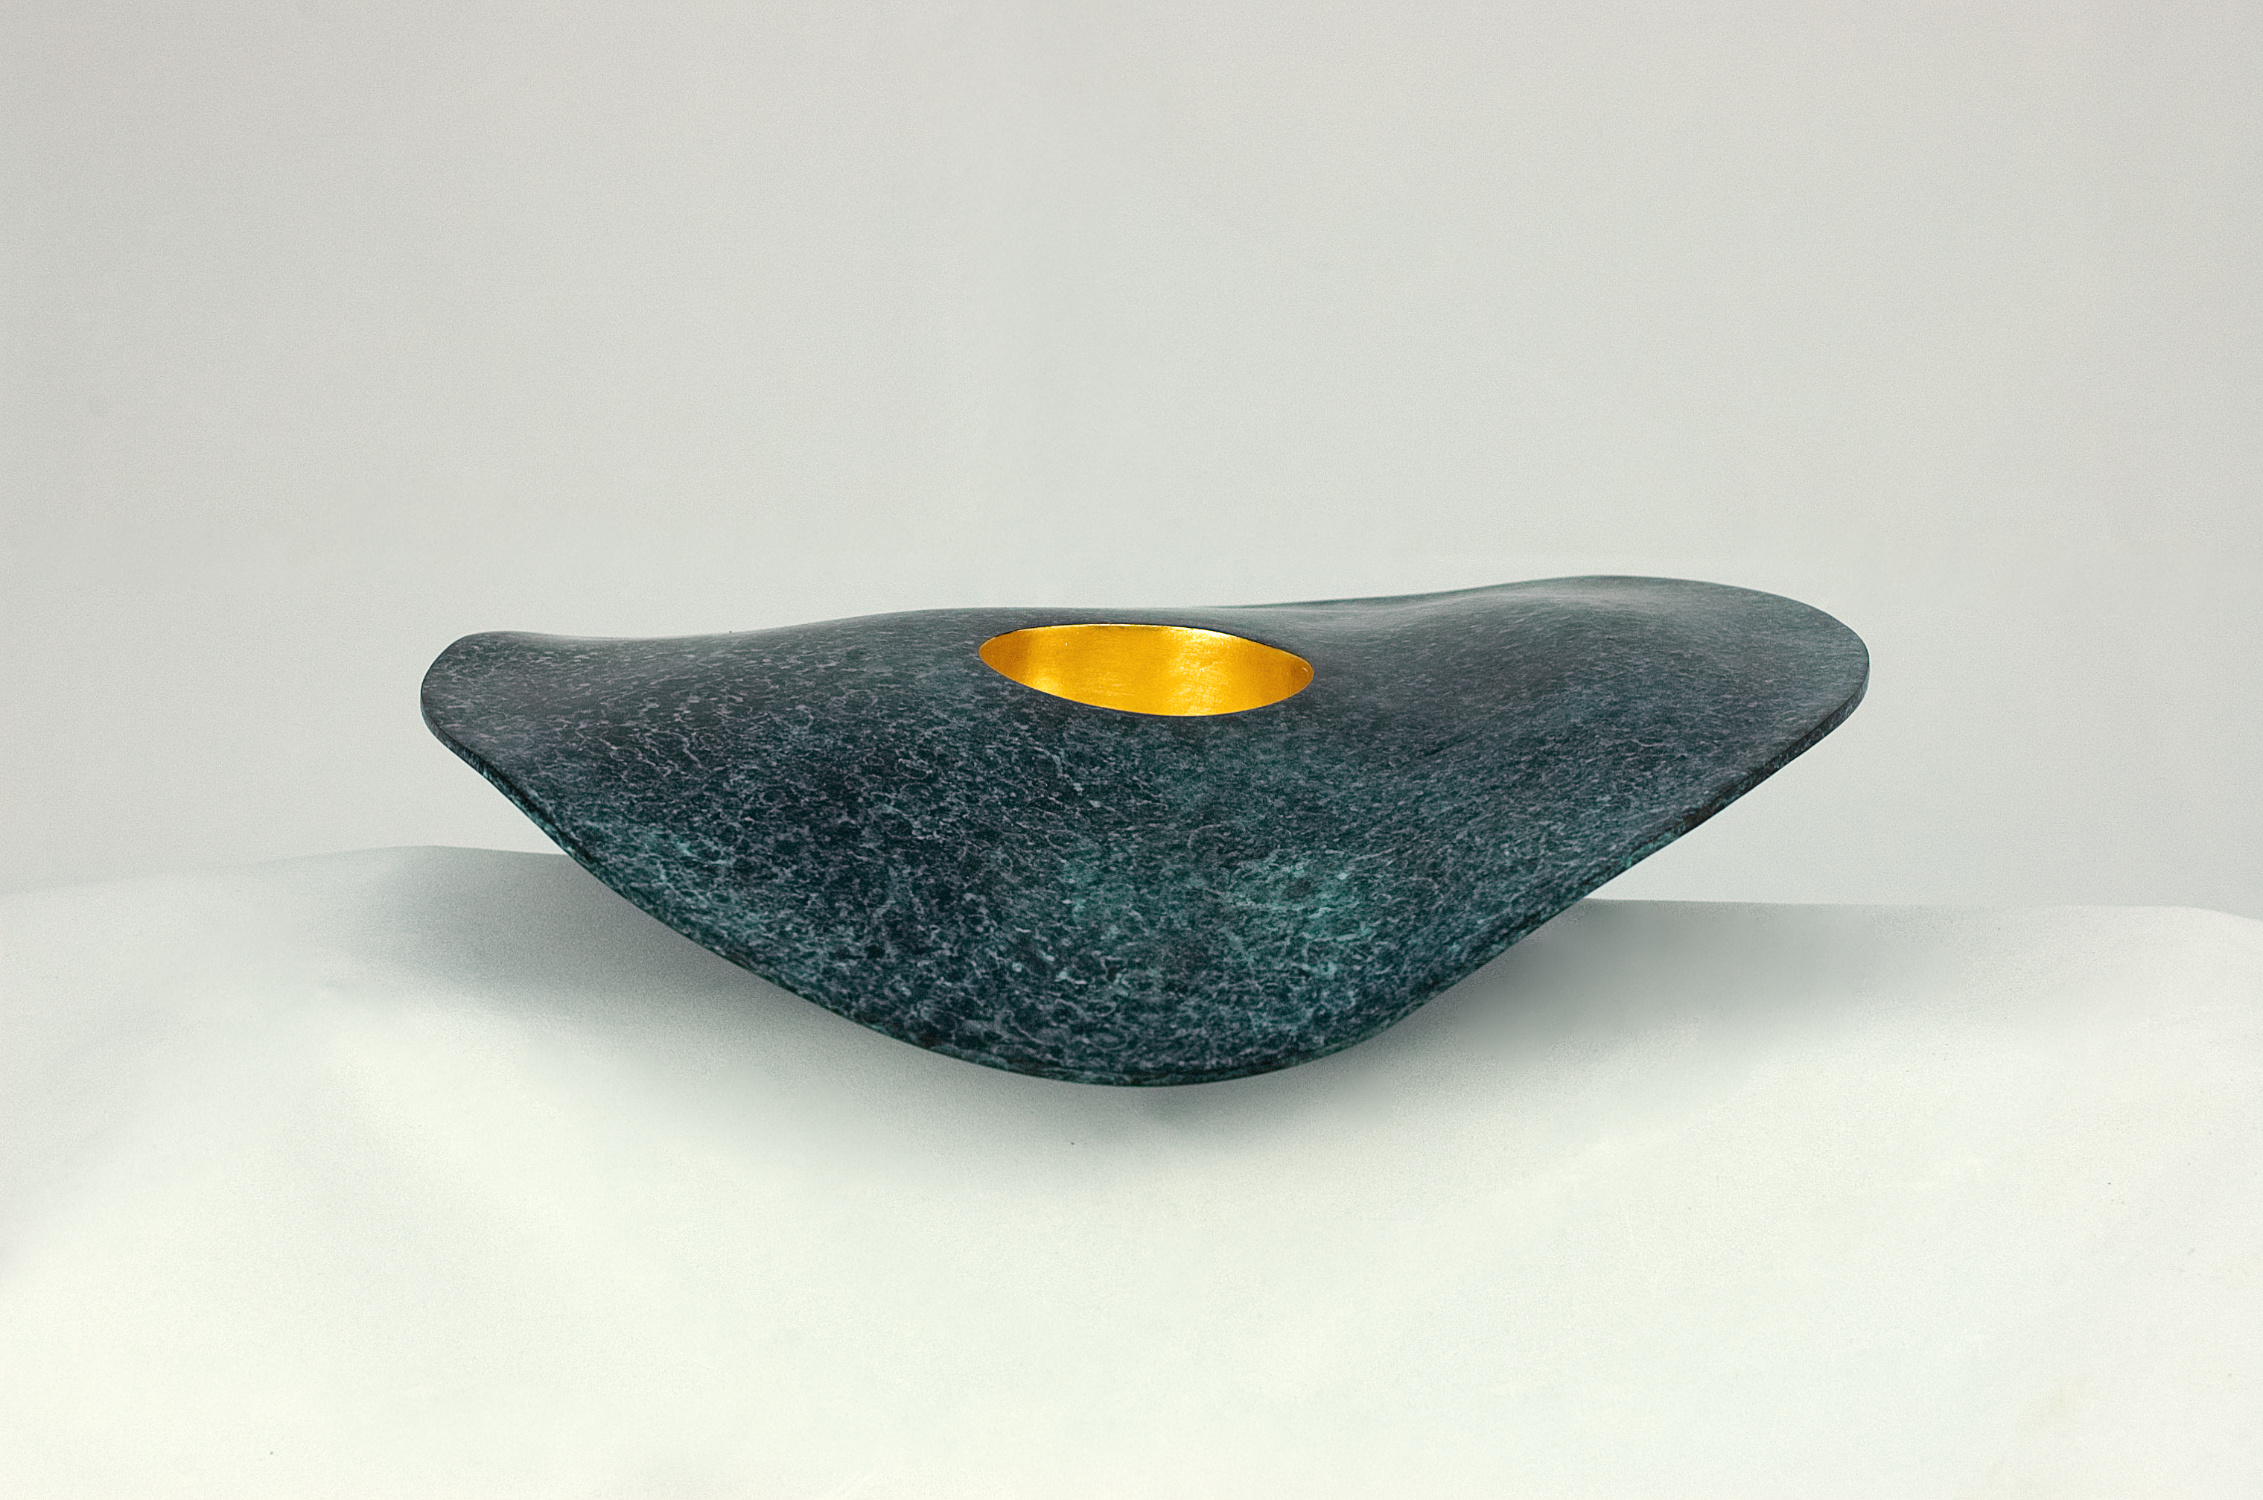 Modern sculpture in bronze. Wide rimmed bowl with the inside of the bowl gilded in 23.5 carat gold. 27 x 5 cms. 2018. One of an edition of 8.